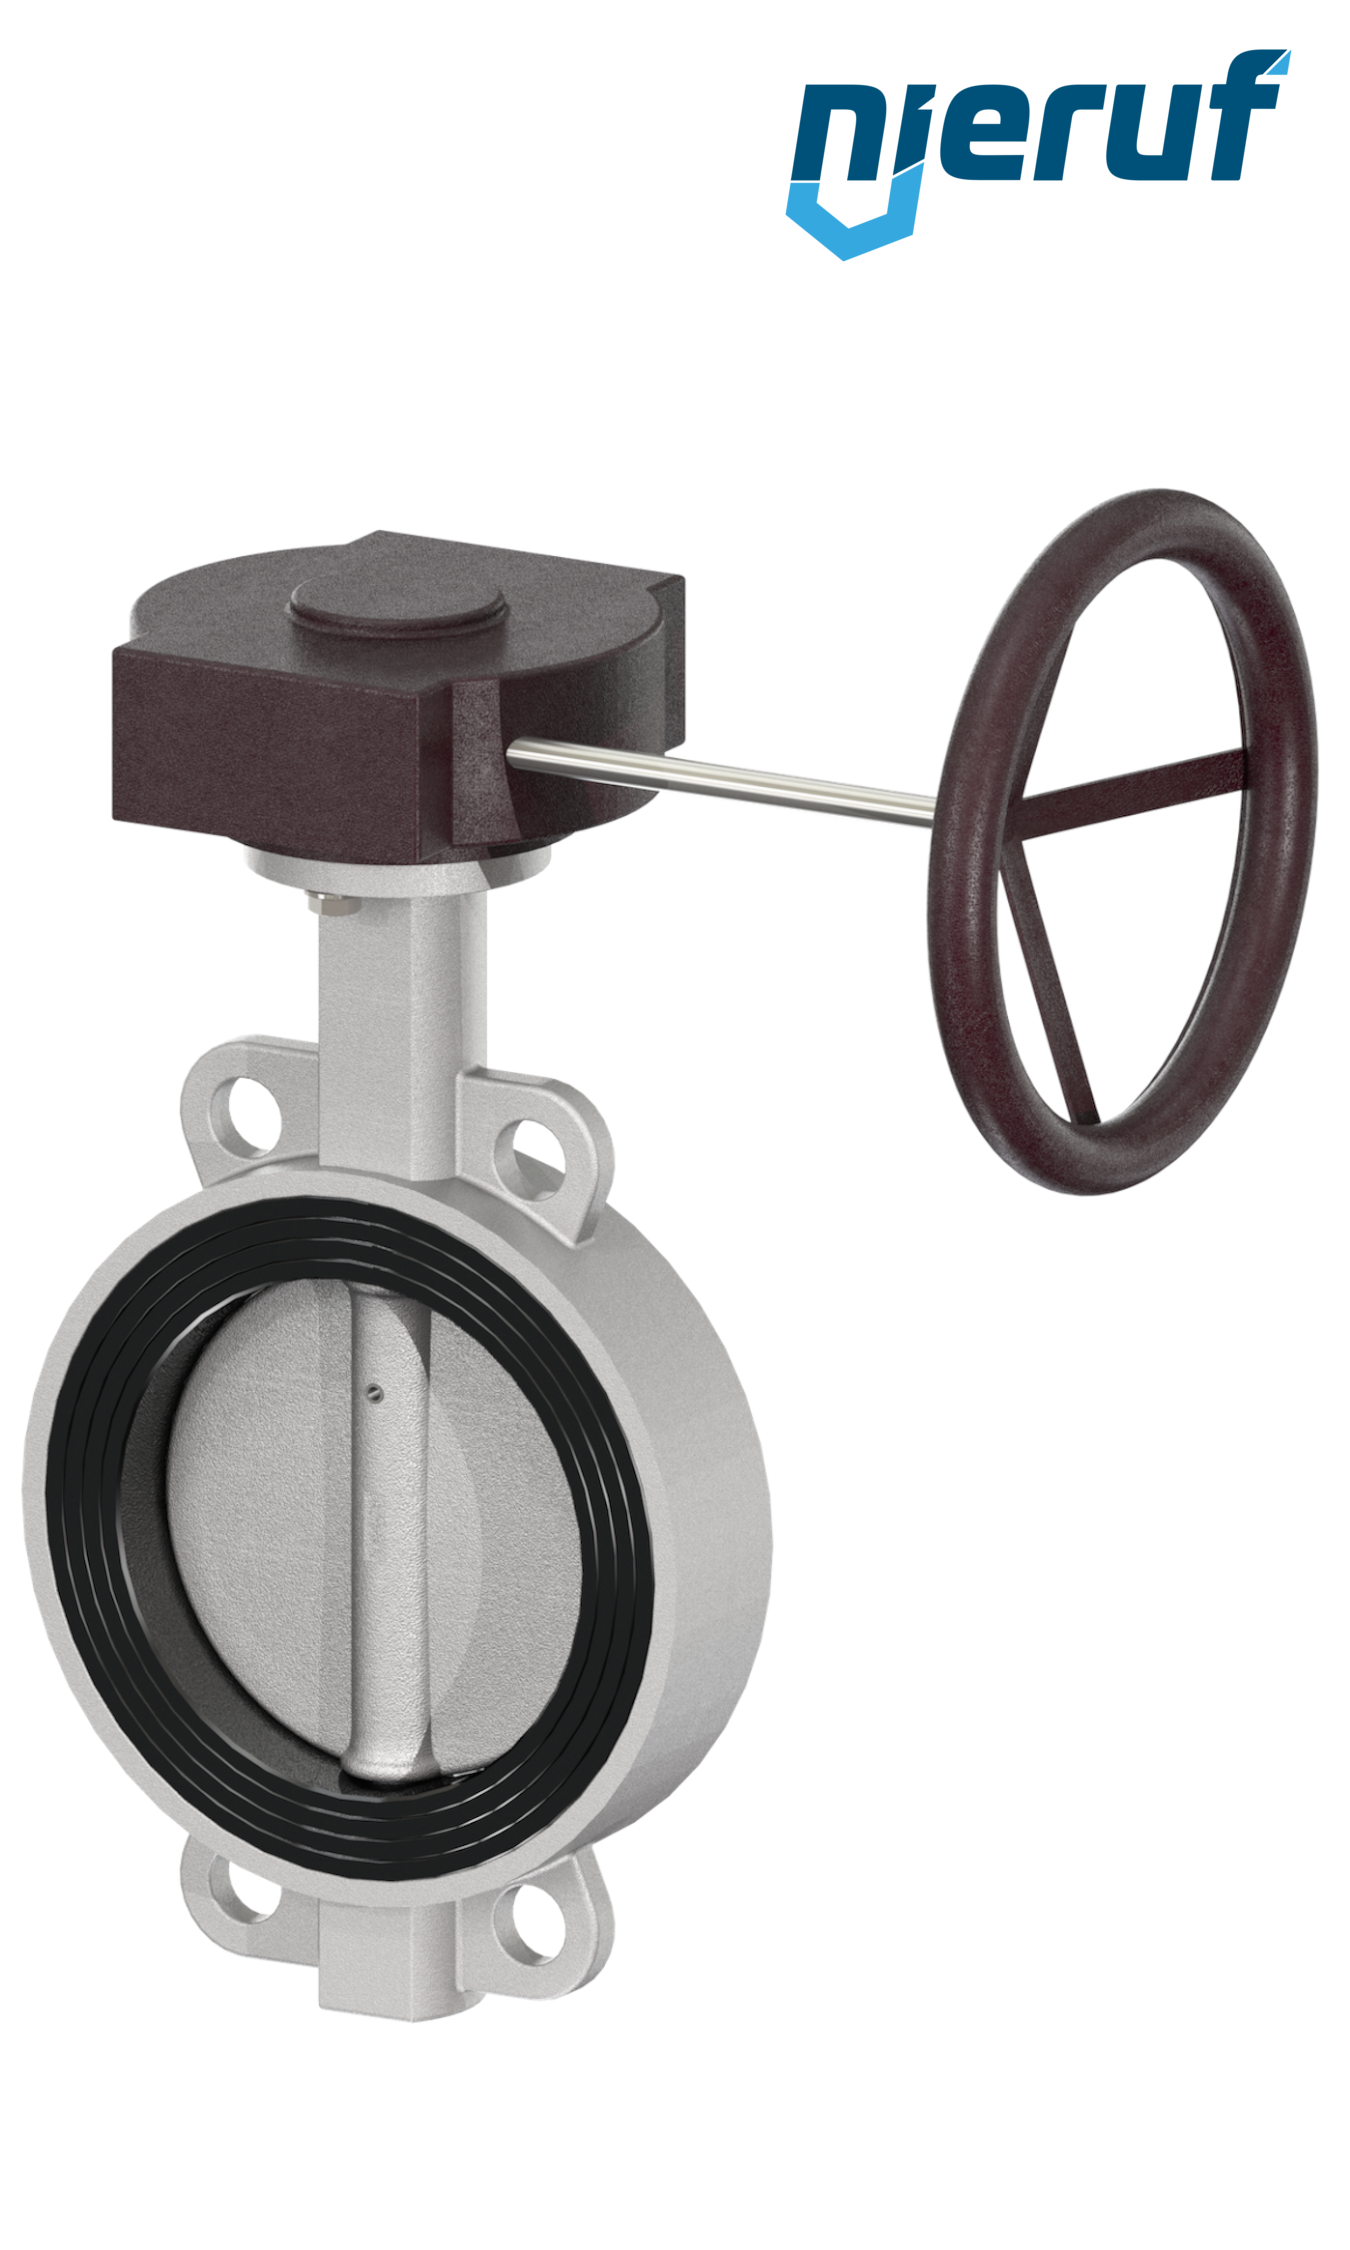 Butterfly-valve-stainless-steel DN250 PN16 AK08 EPDM gearbox